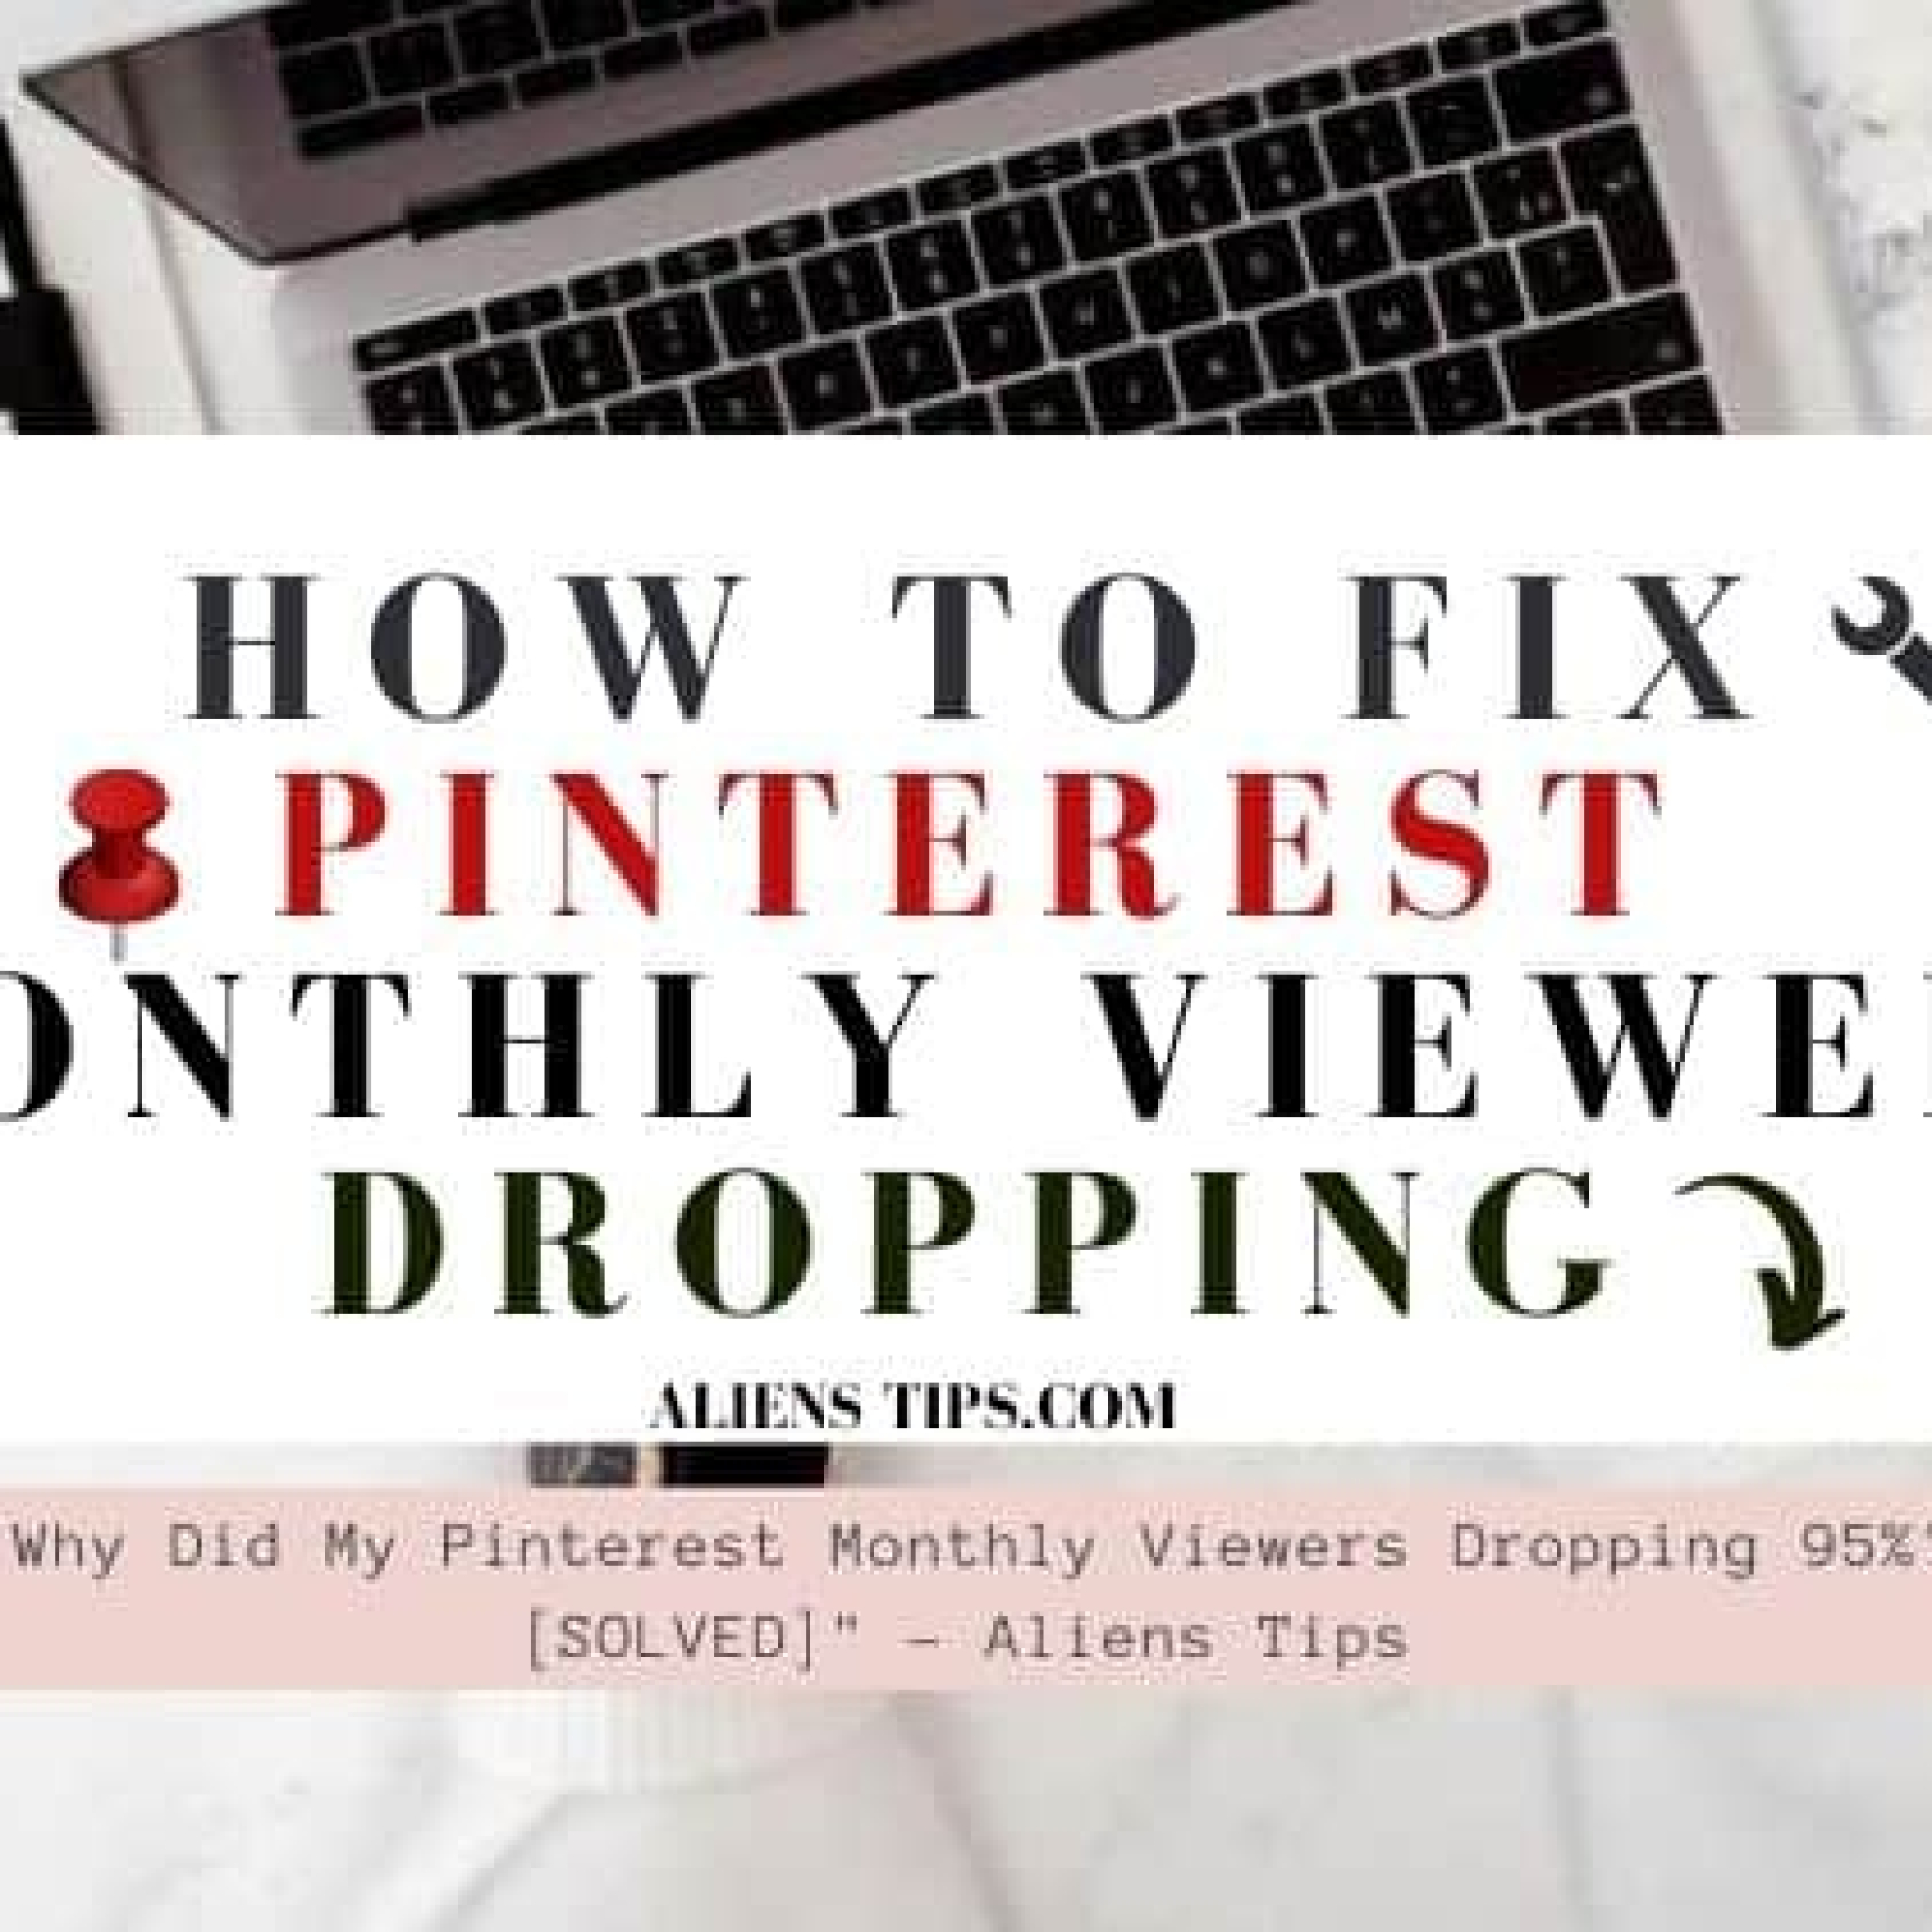 Why Did My Pinterest Monthly Viewers Dropping 95%_ [SOLVED]- Aliens Tips (4).jpg